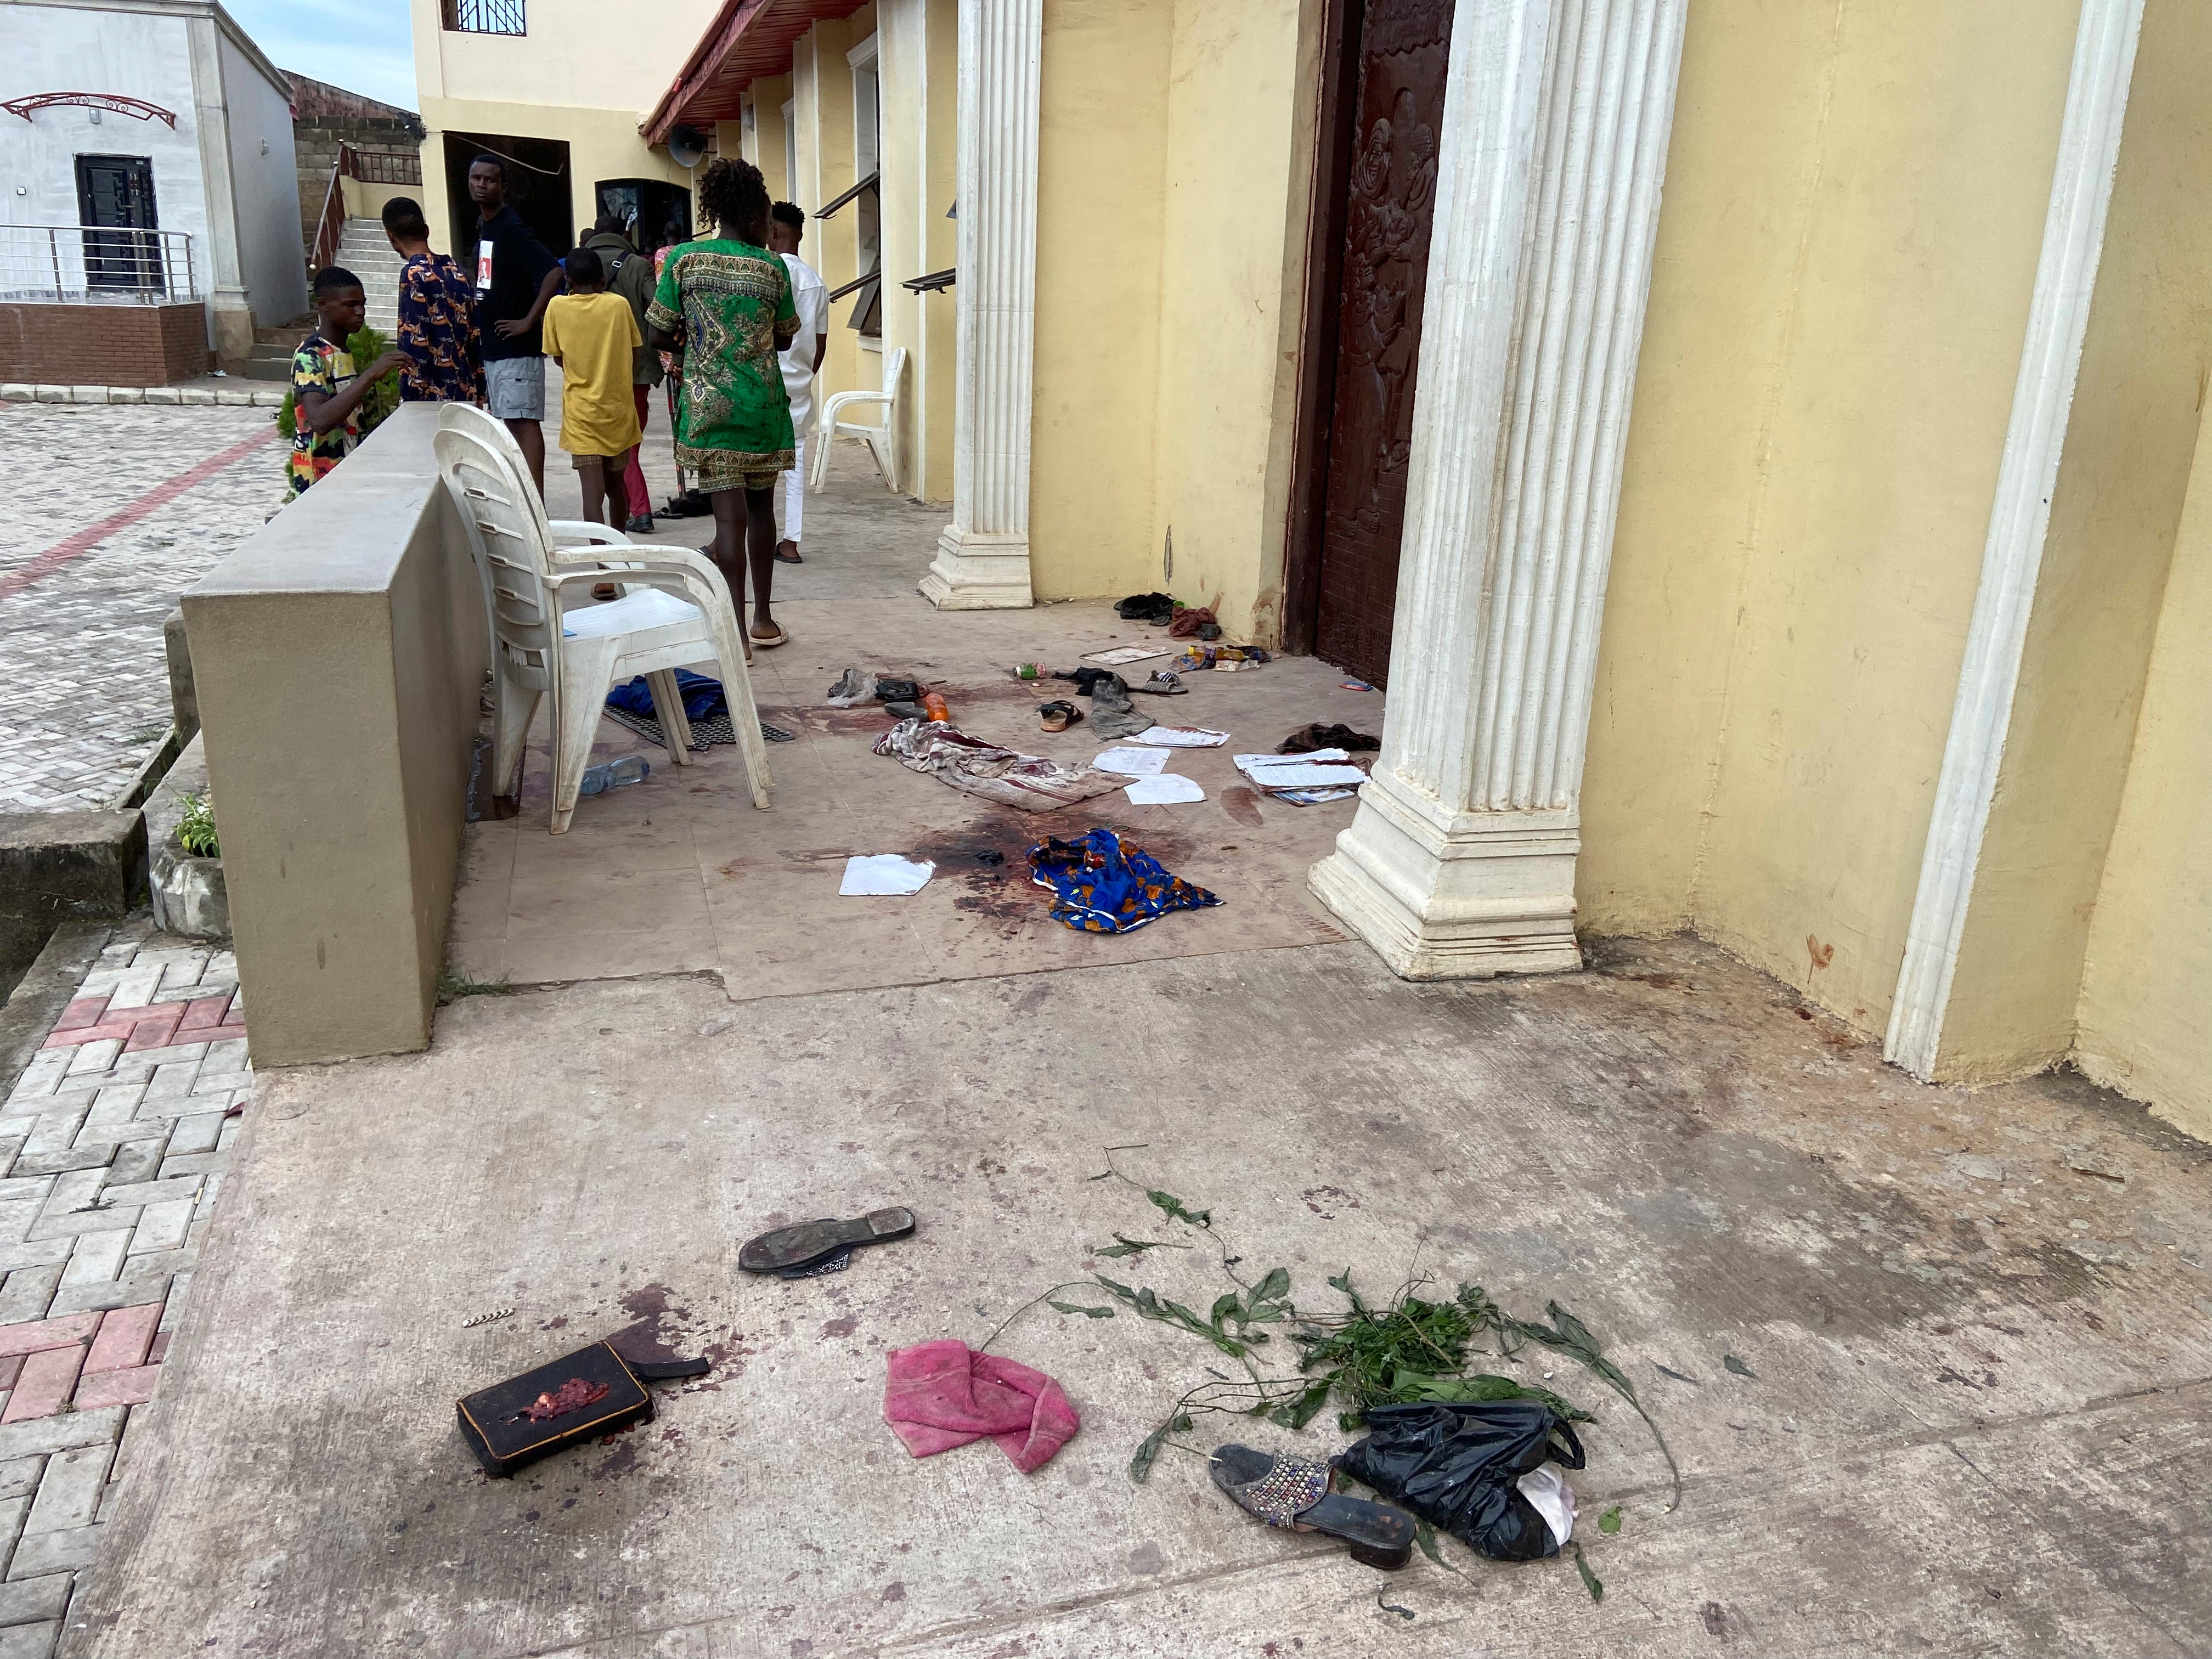 The attackers targeted the St. Francis Catholic Church in Ondo state just as the worshippers gathered on Pentecost Sunday